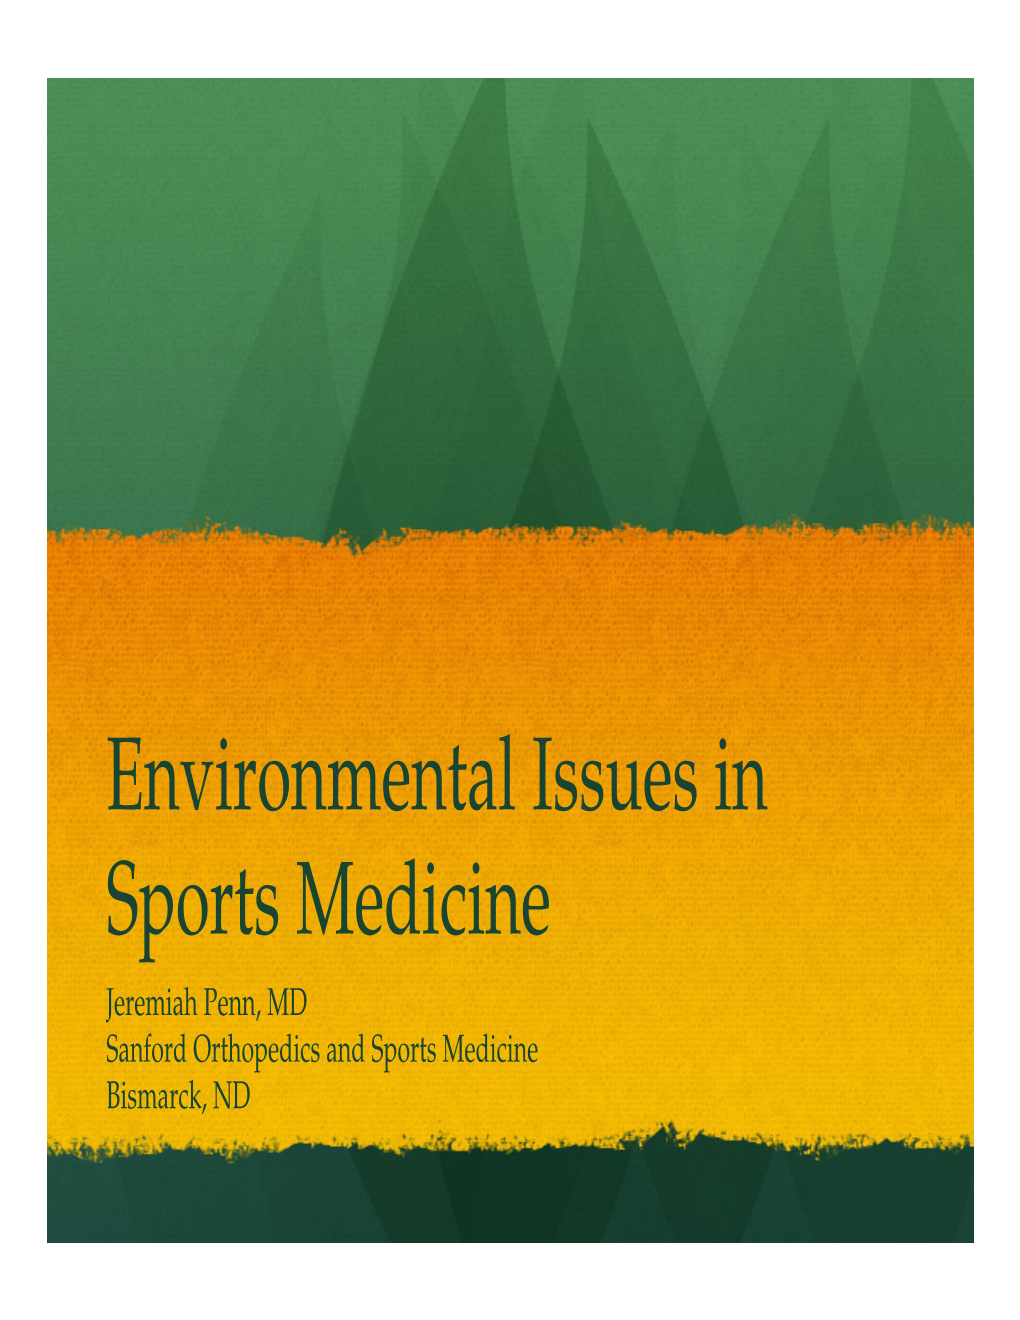 Environmental Issues in Sports Medicine Jeremiah Penn, MD Sanford Orthopedics and Sports Medicine Bismarck, ND Lecture Objectives